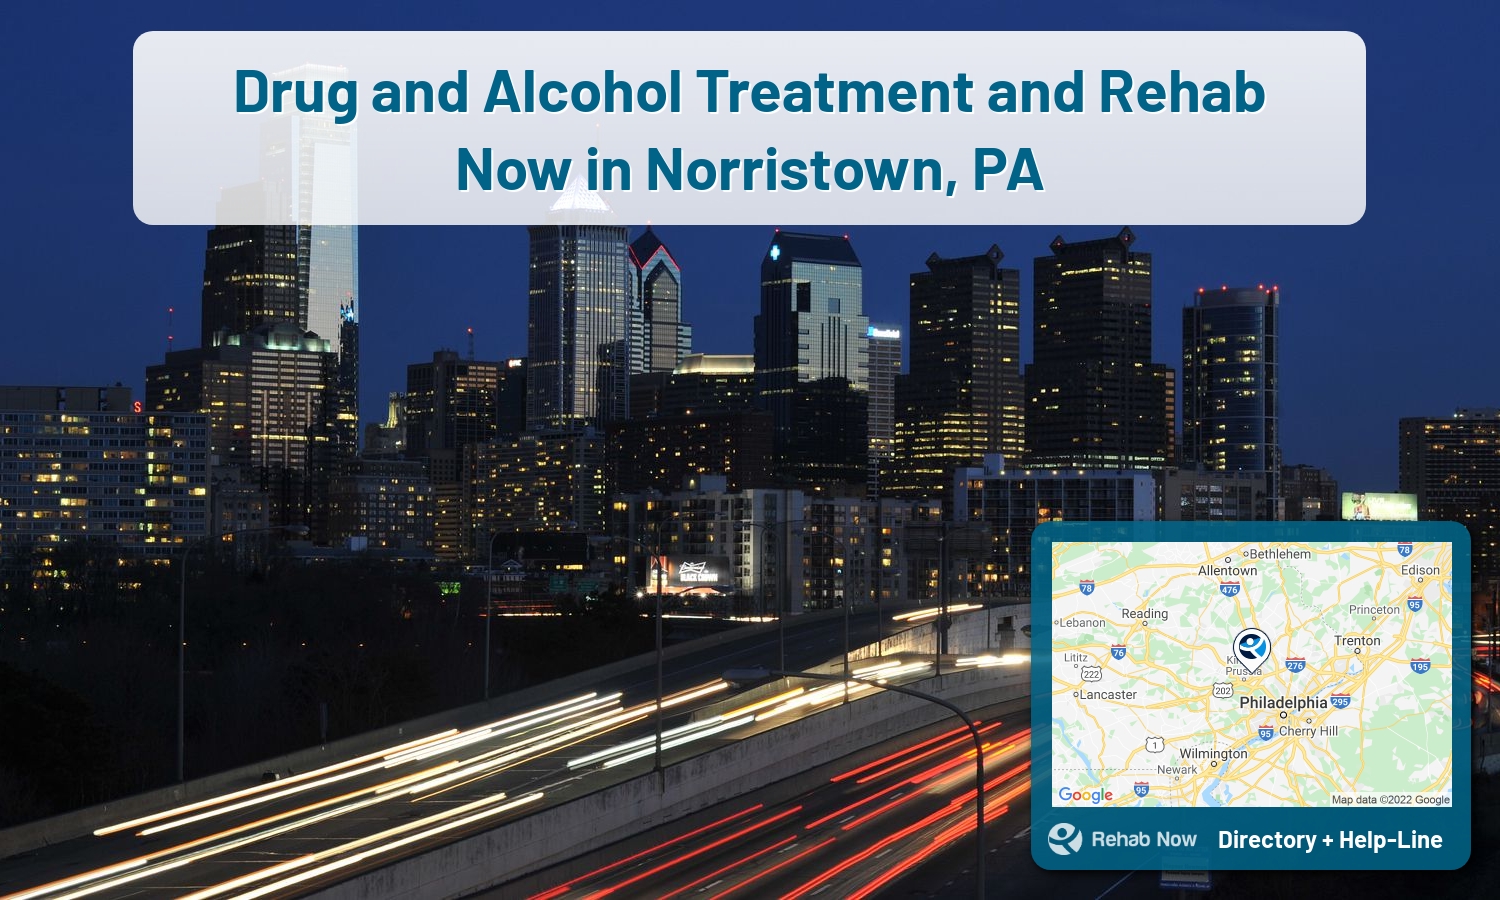 Norristown, PA Treatment Centers. Find drug rehab in Norristown, Pennsylvania, or detox and treatment programs. Get the right help now!